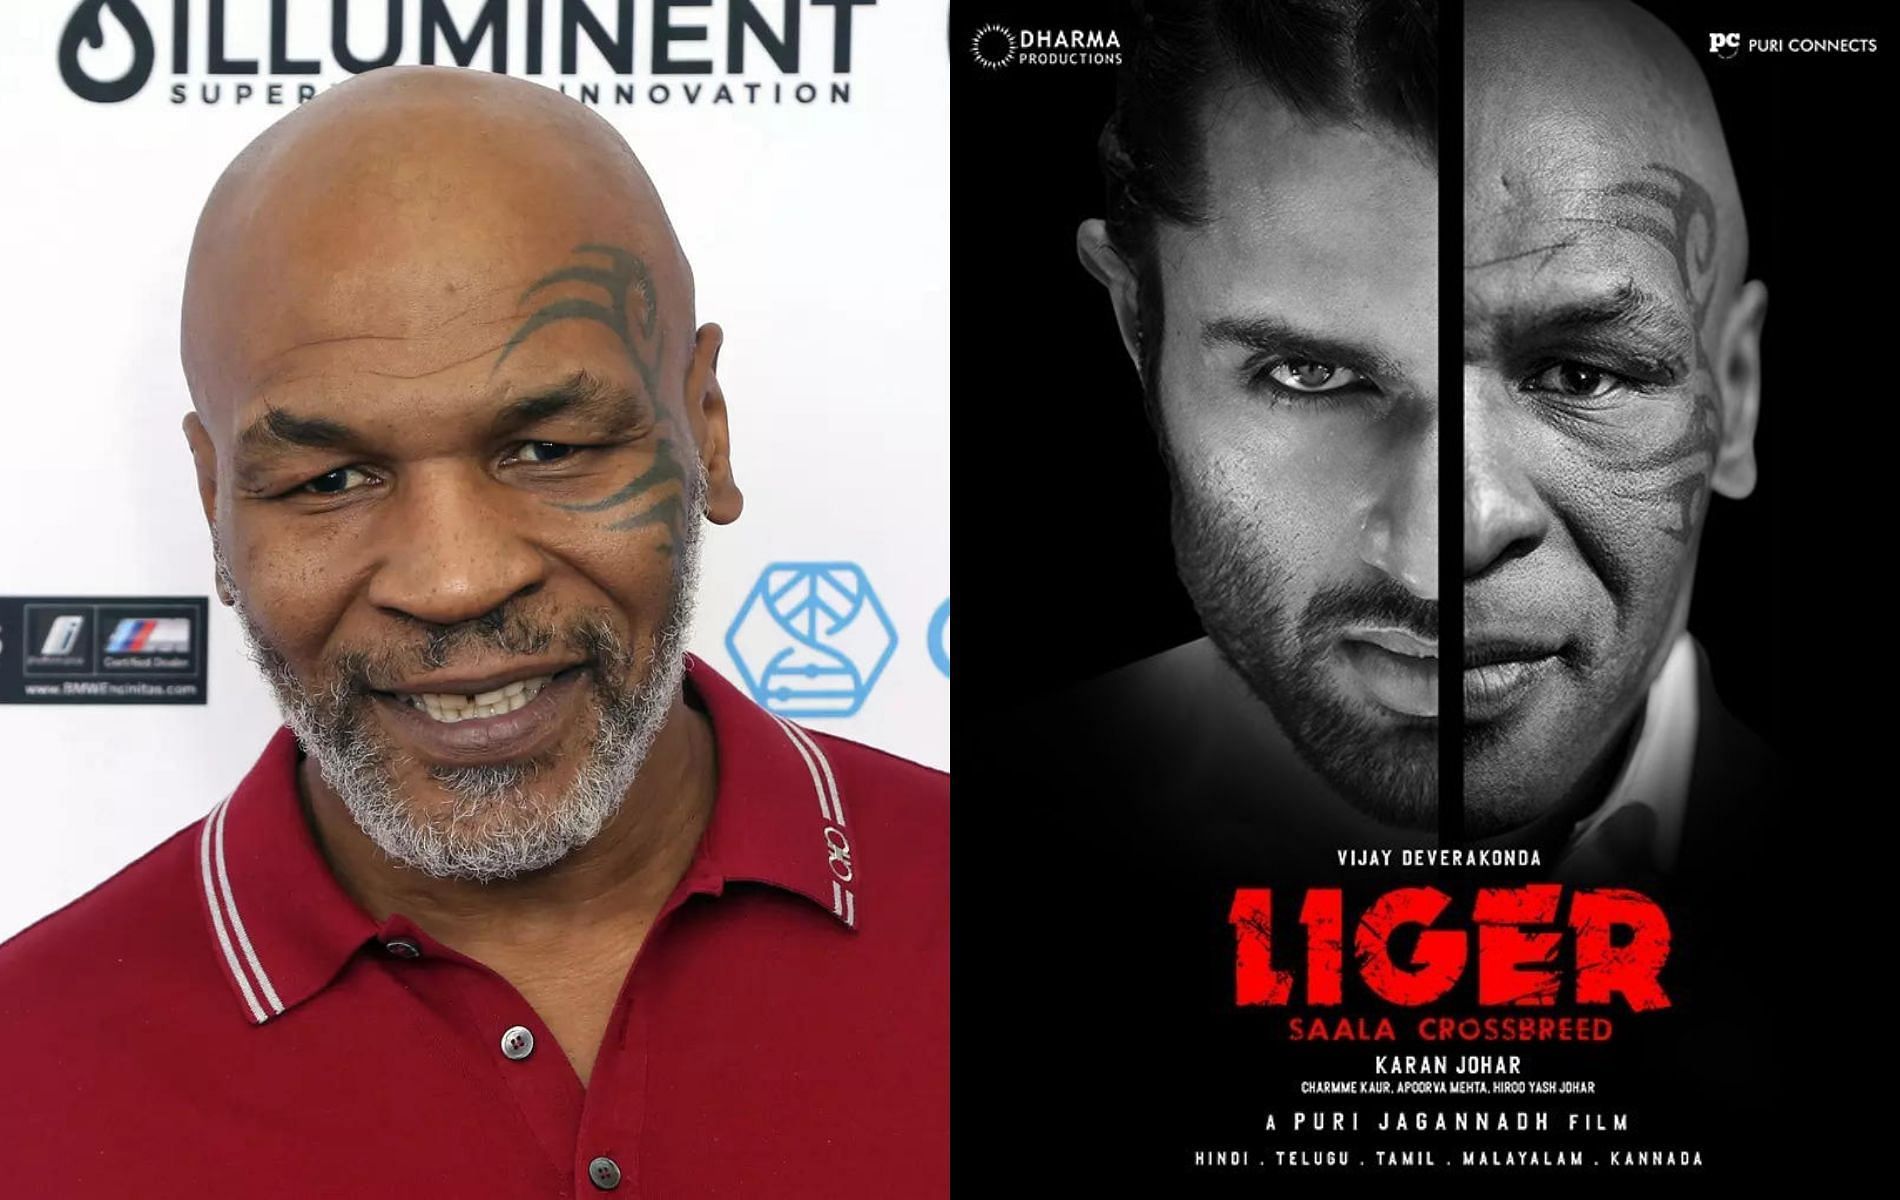 Mike Tyson is set to star in upcoming Indian movie Liger